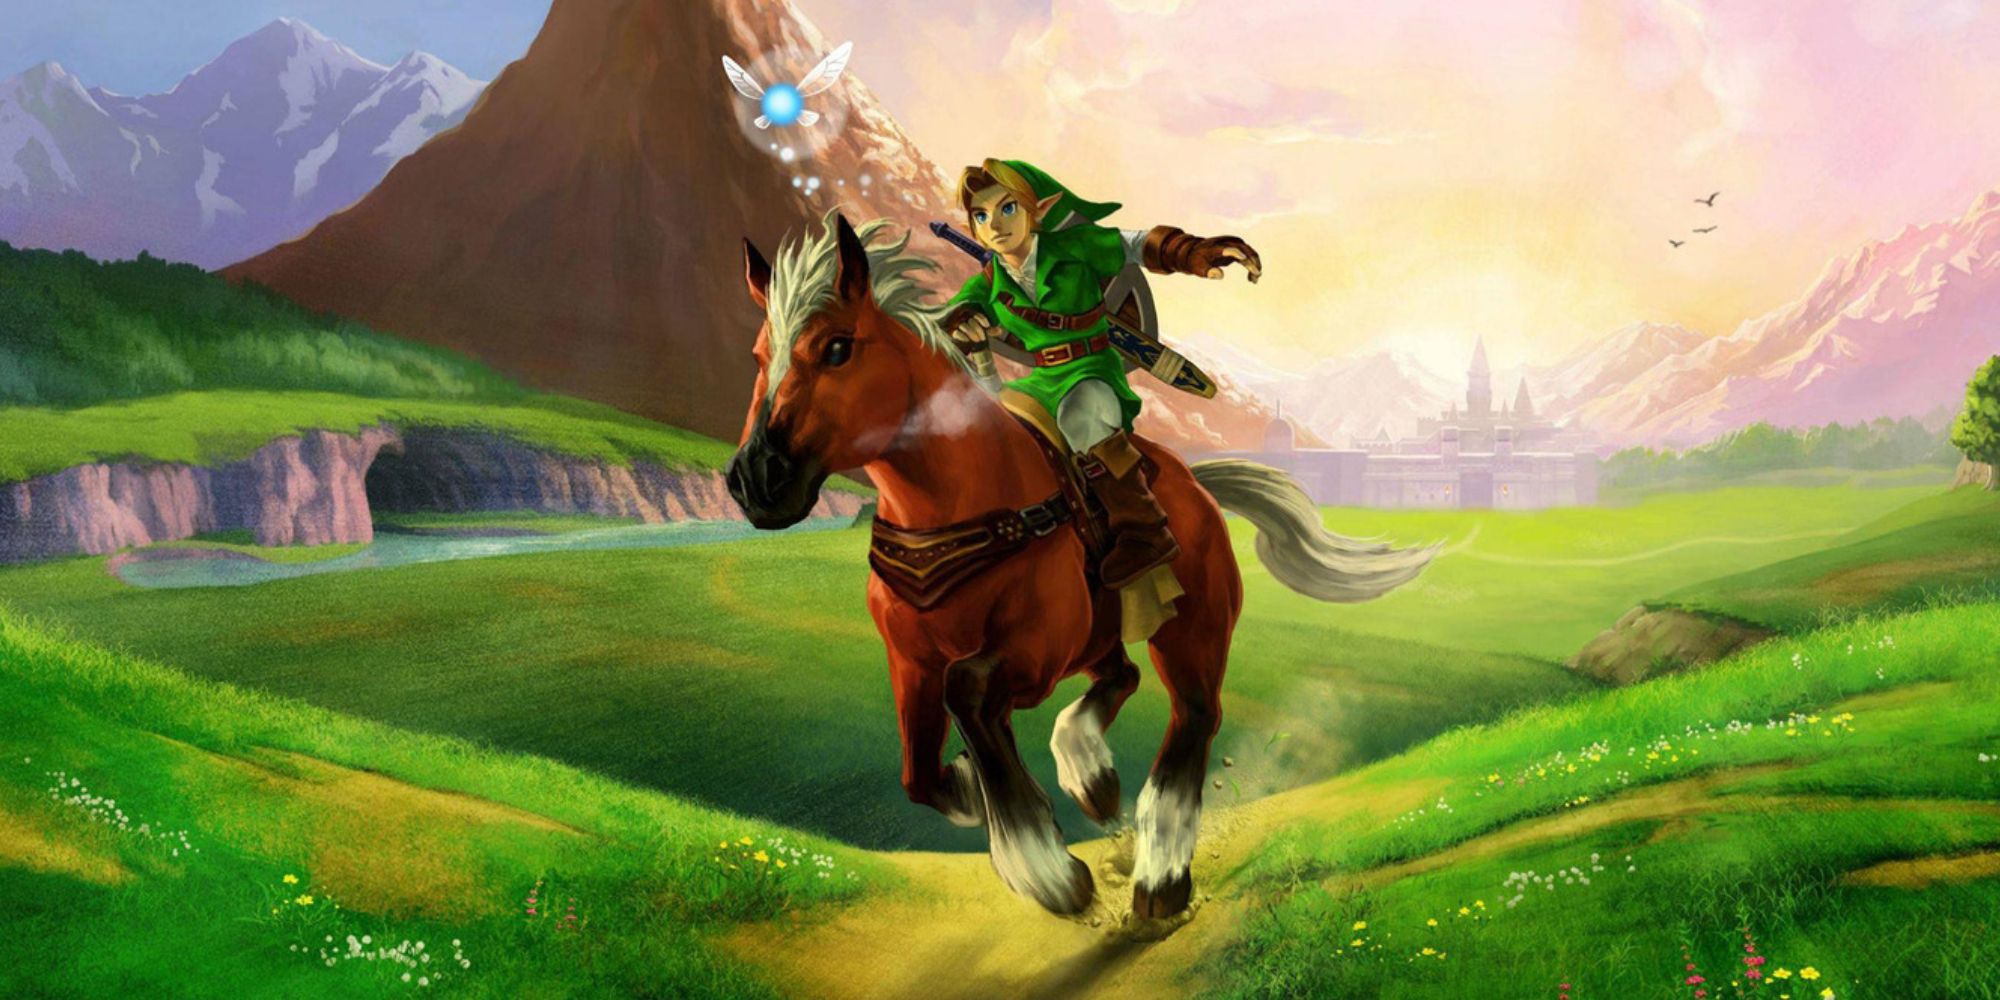 Zelda: Ocarina Of Time Is Finally Part Of The Video Game Hall Of Fame